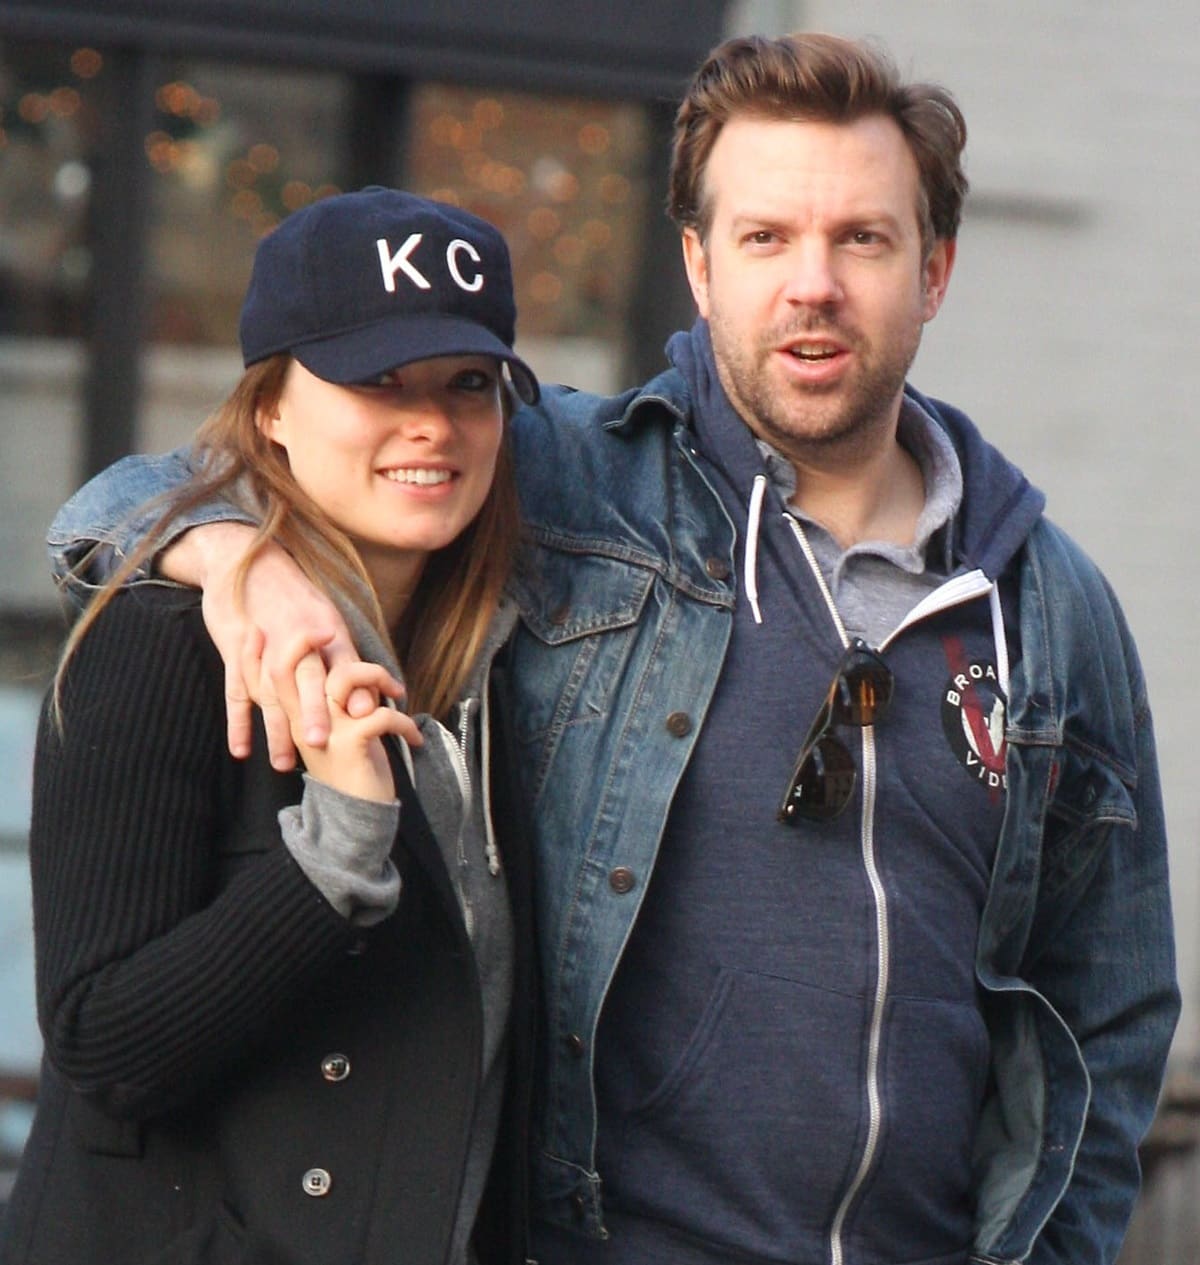 Jason Sudeikis and Olivia Wilde, who were engaged for seven years, ended their relationship in 2020